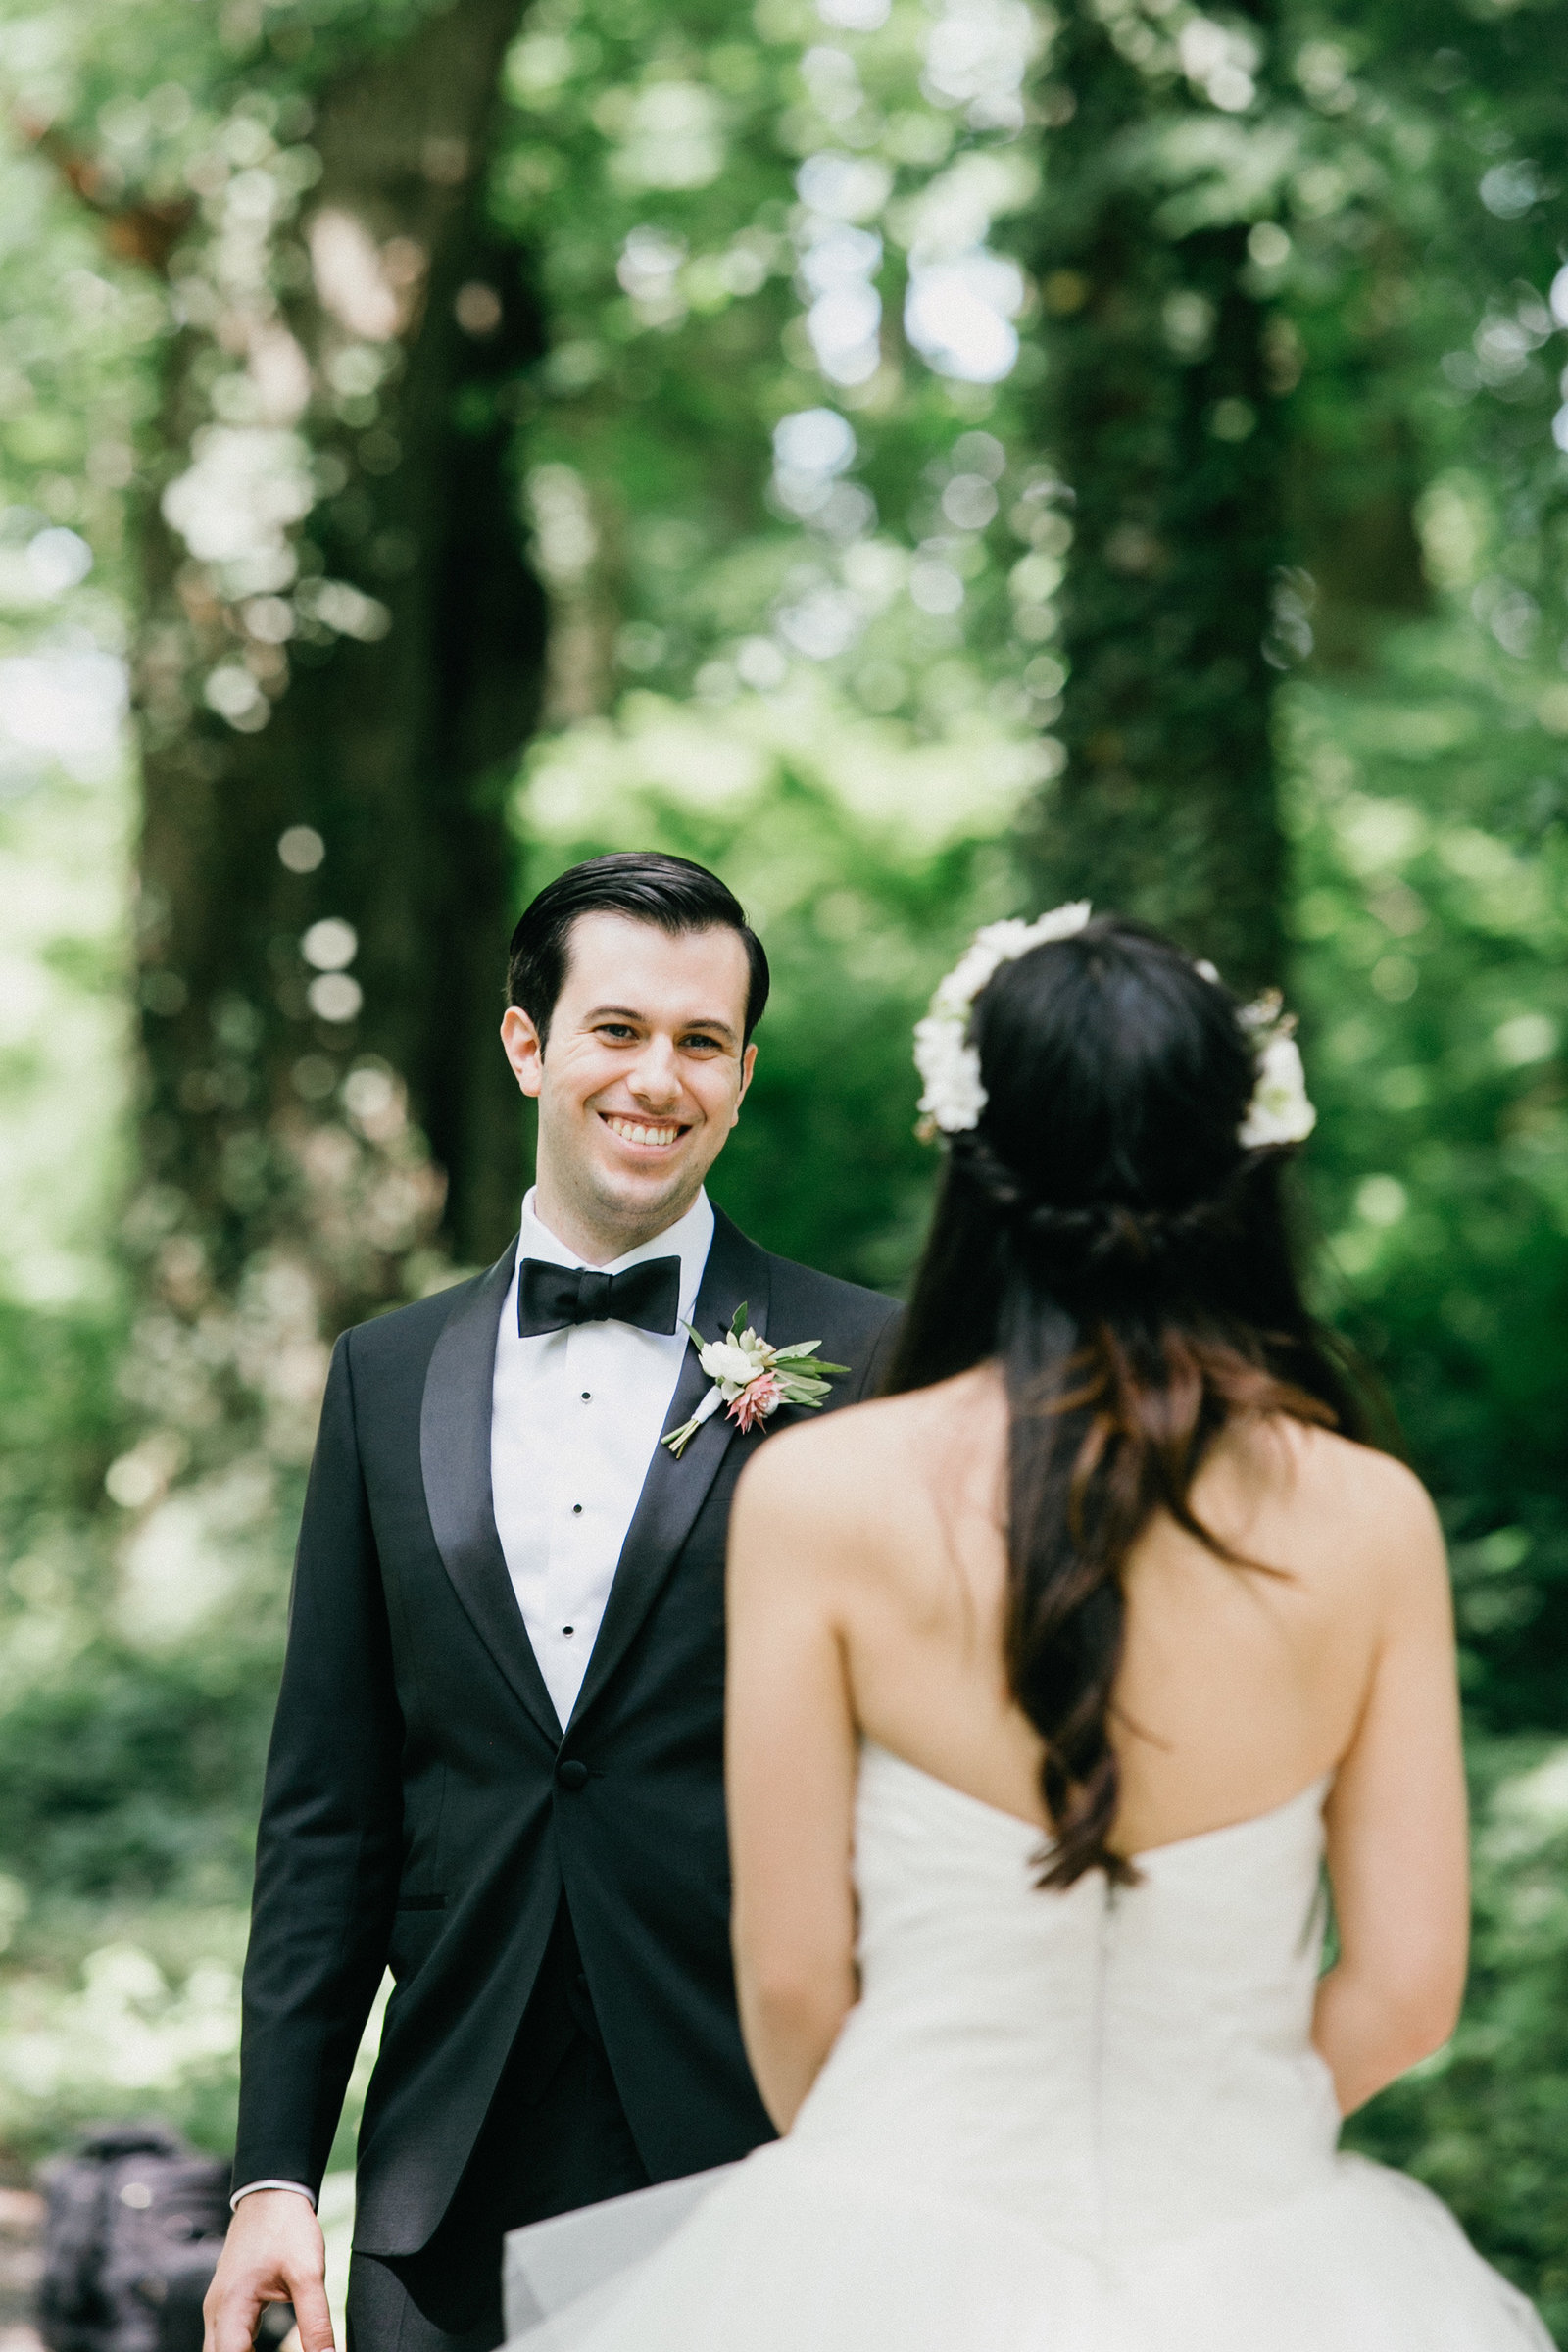 Groom seeing his bride for the first time at Fernbrook Farm.